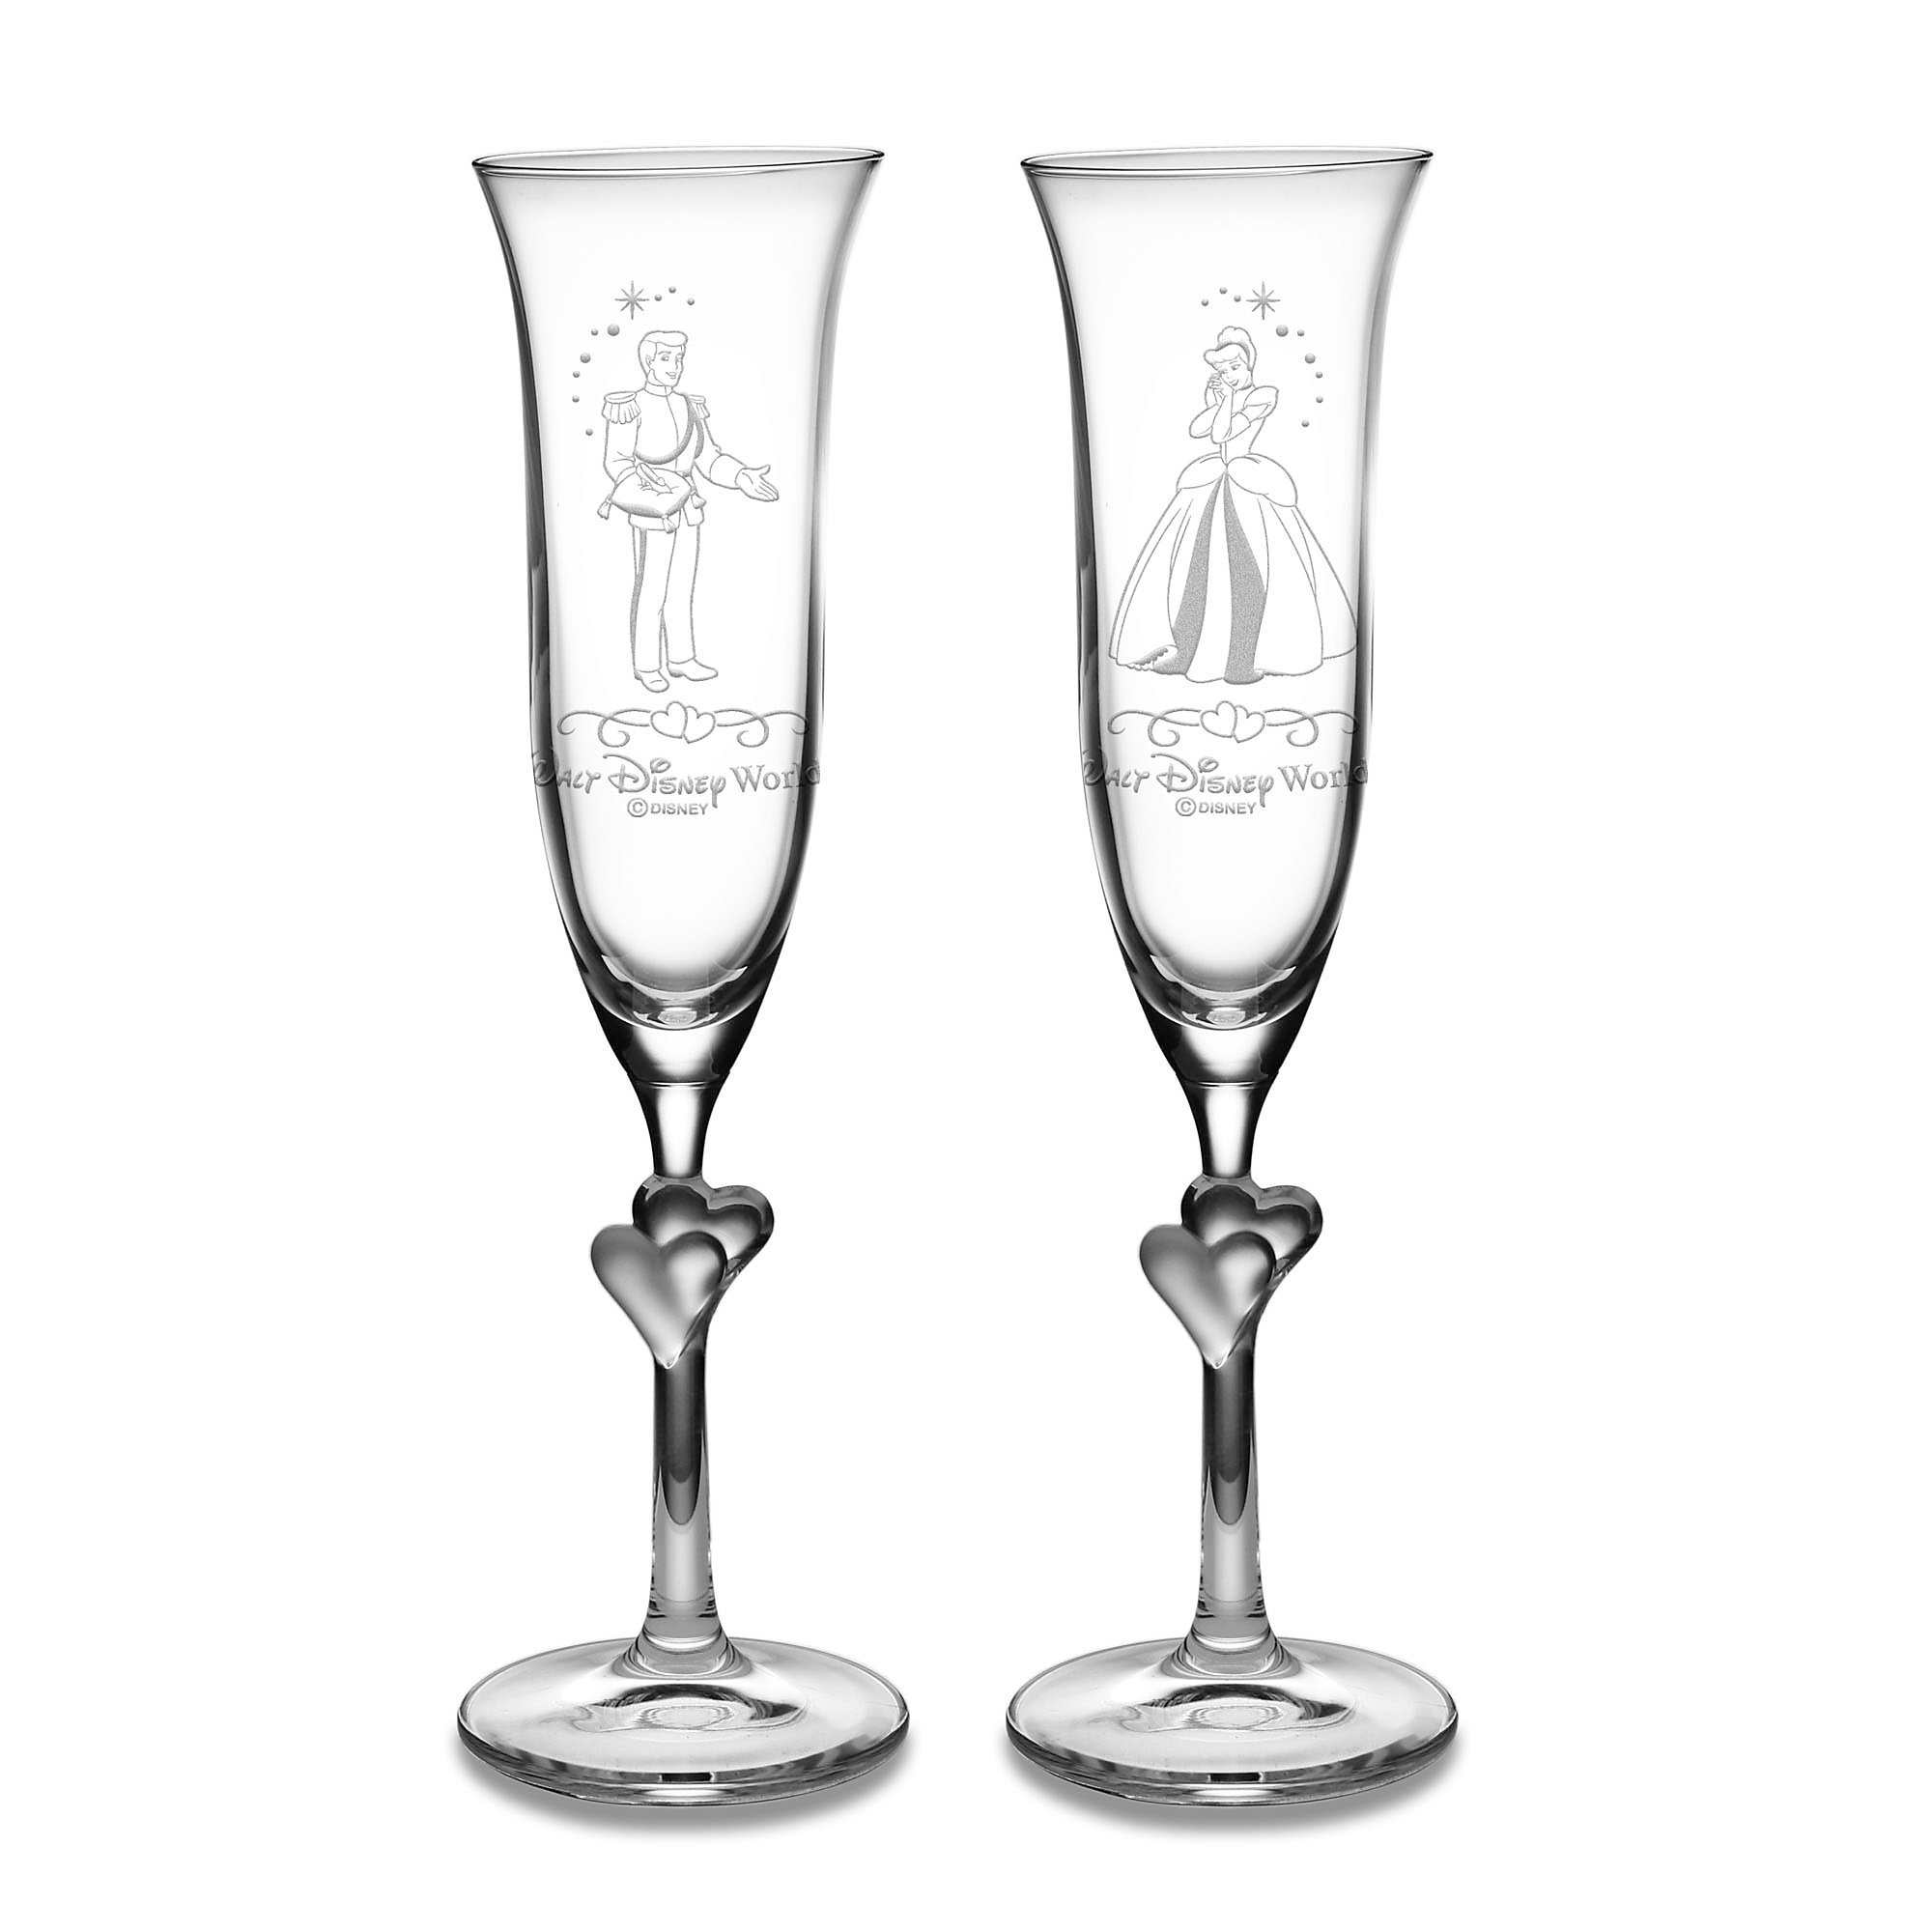 Cinderella and Prince Charming Glass Flute Set by Arribas - Personalizable